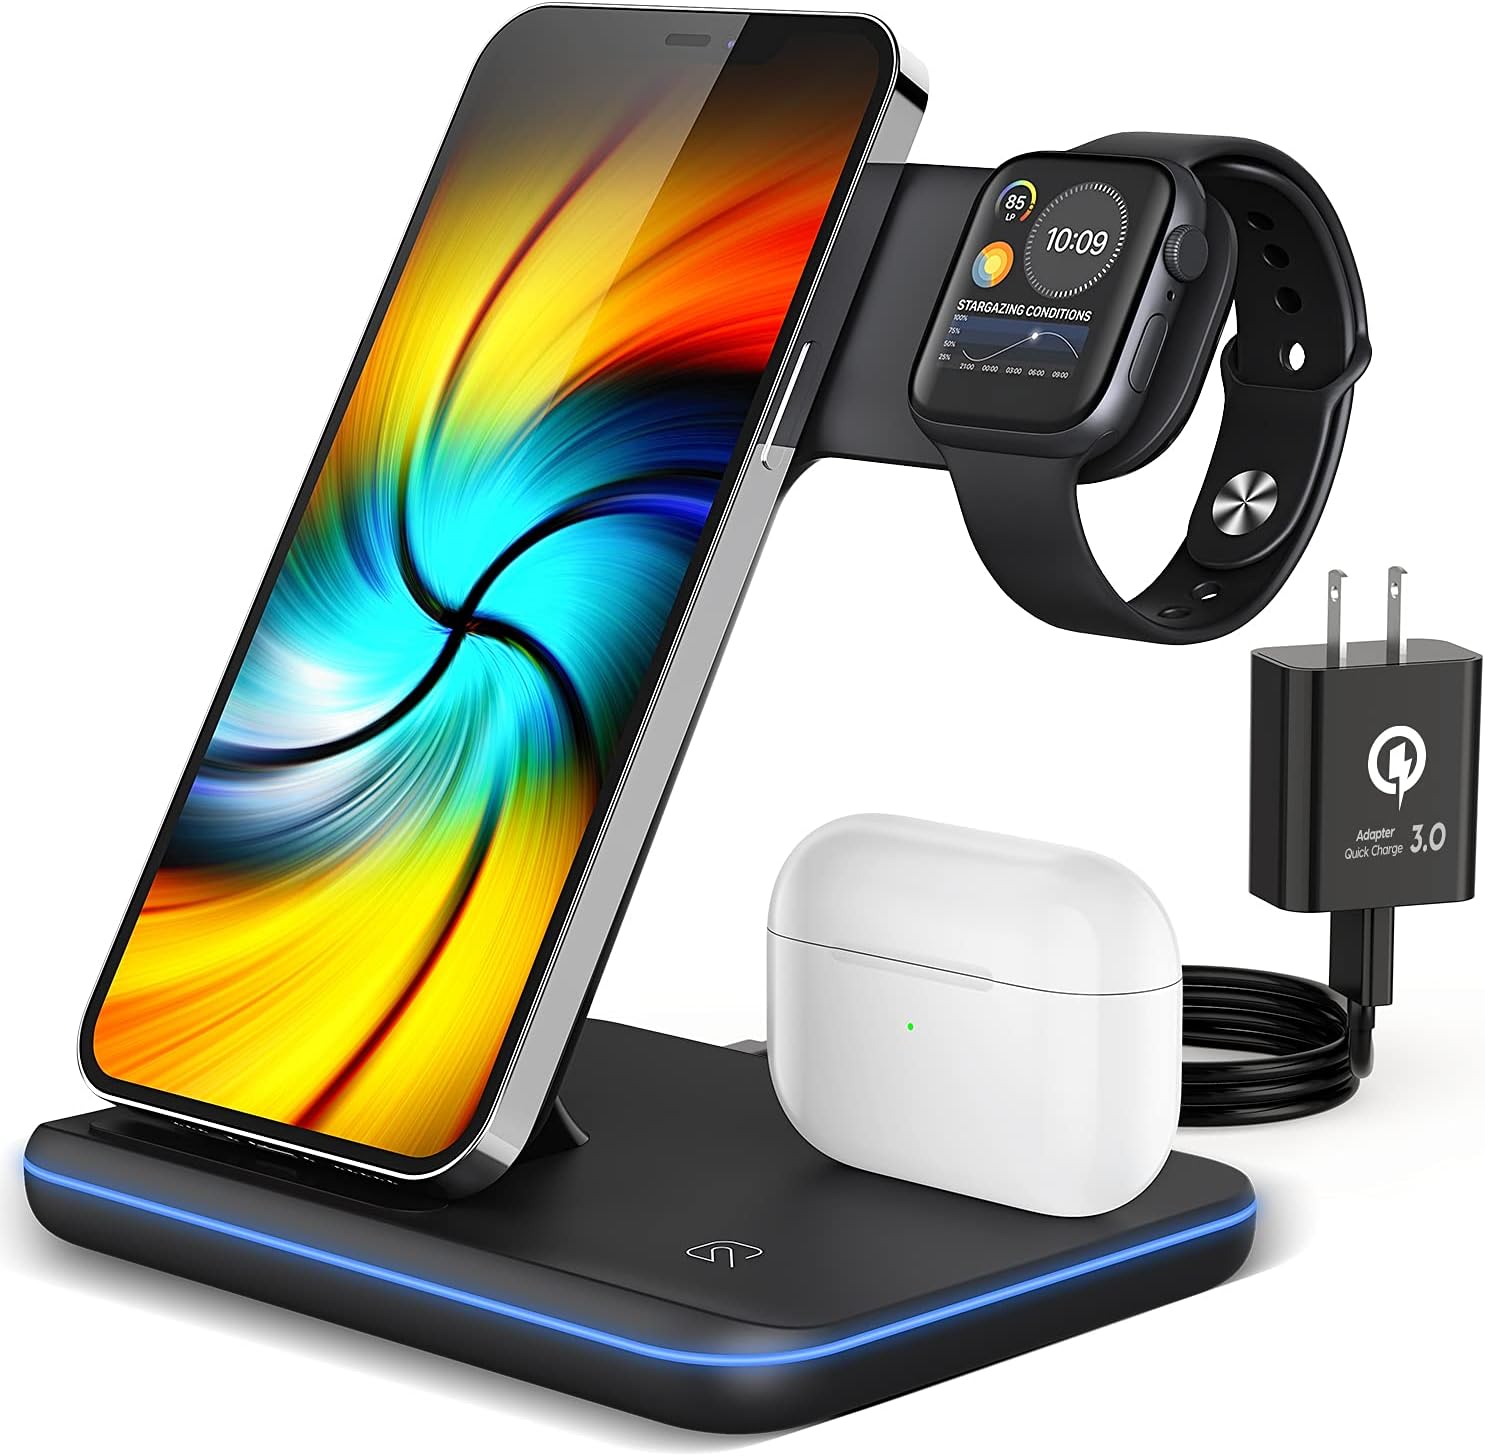 Wireless Charging Station, 2021 Upgraded 3 in 1 Wireless Charger Stand with Breathing Indicator Compatible with iPhone 12/11 Pro/XS/8, iWatch Series